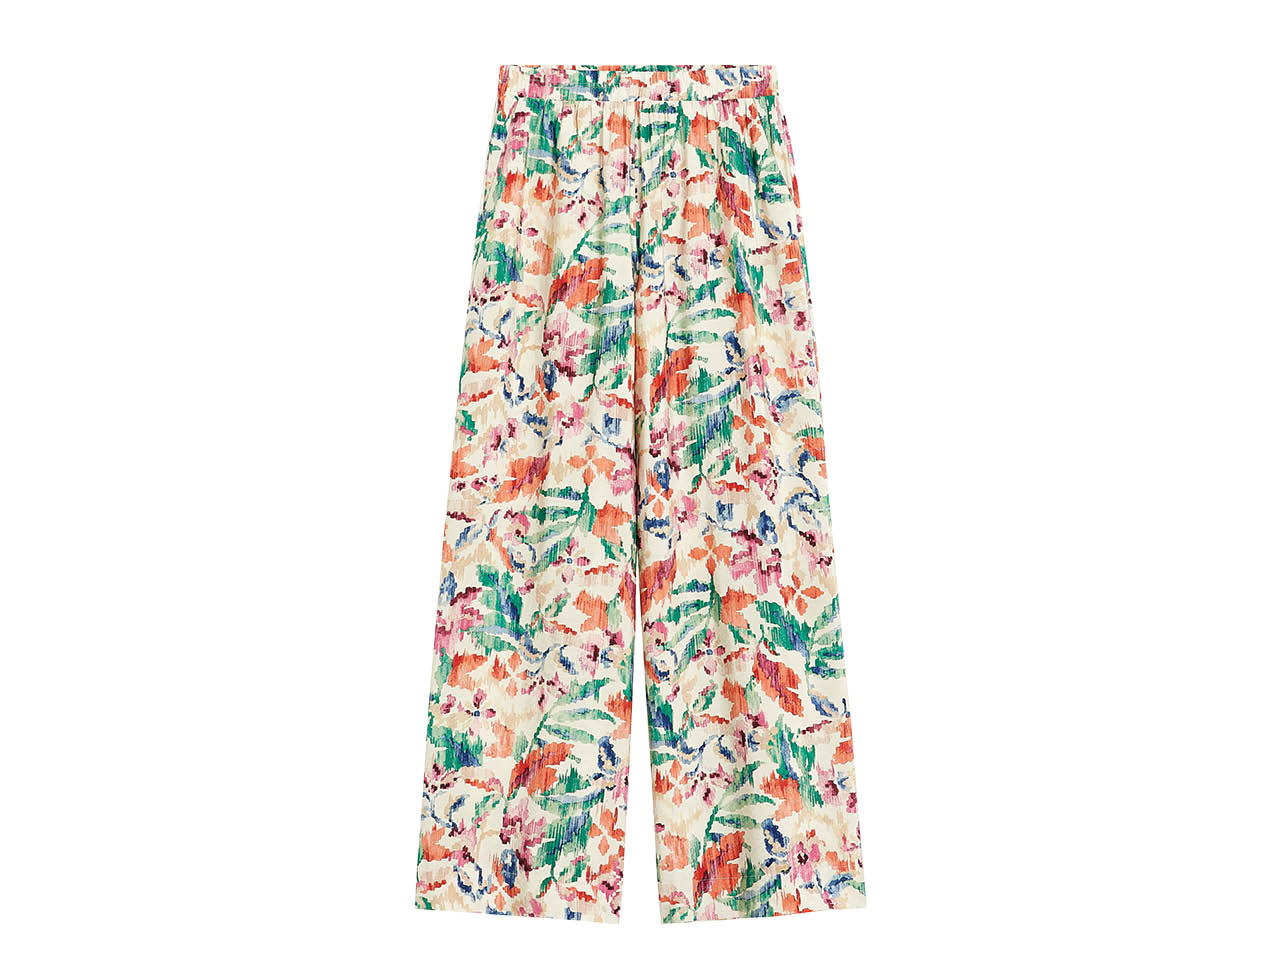 Lightman's flowing wide leg pants in bright print are perfect for summer outfits.